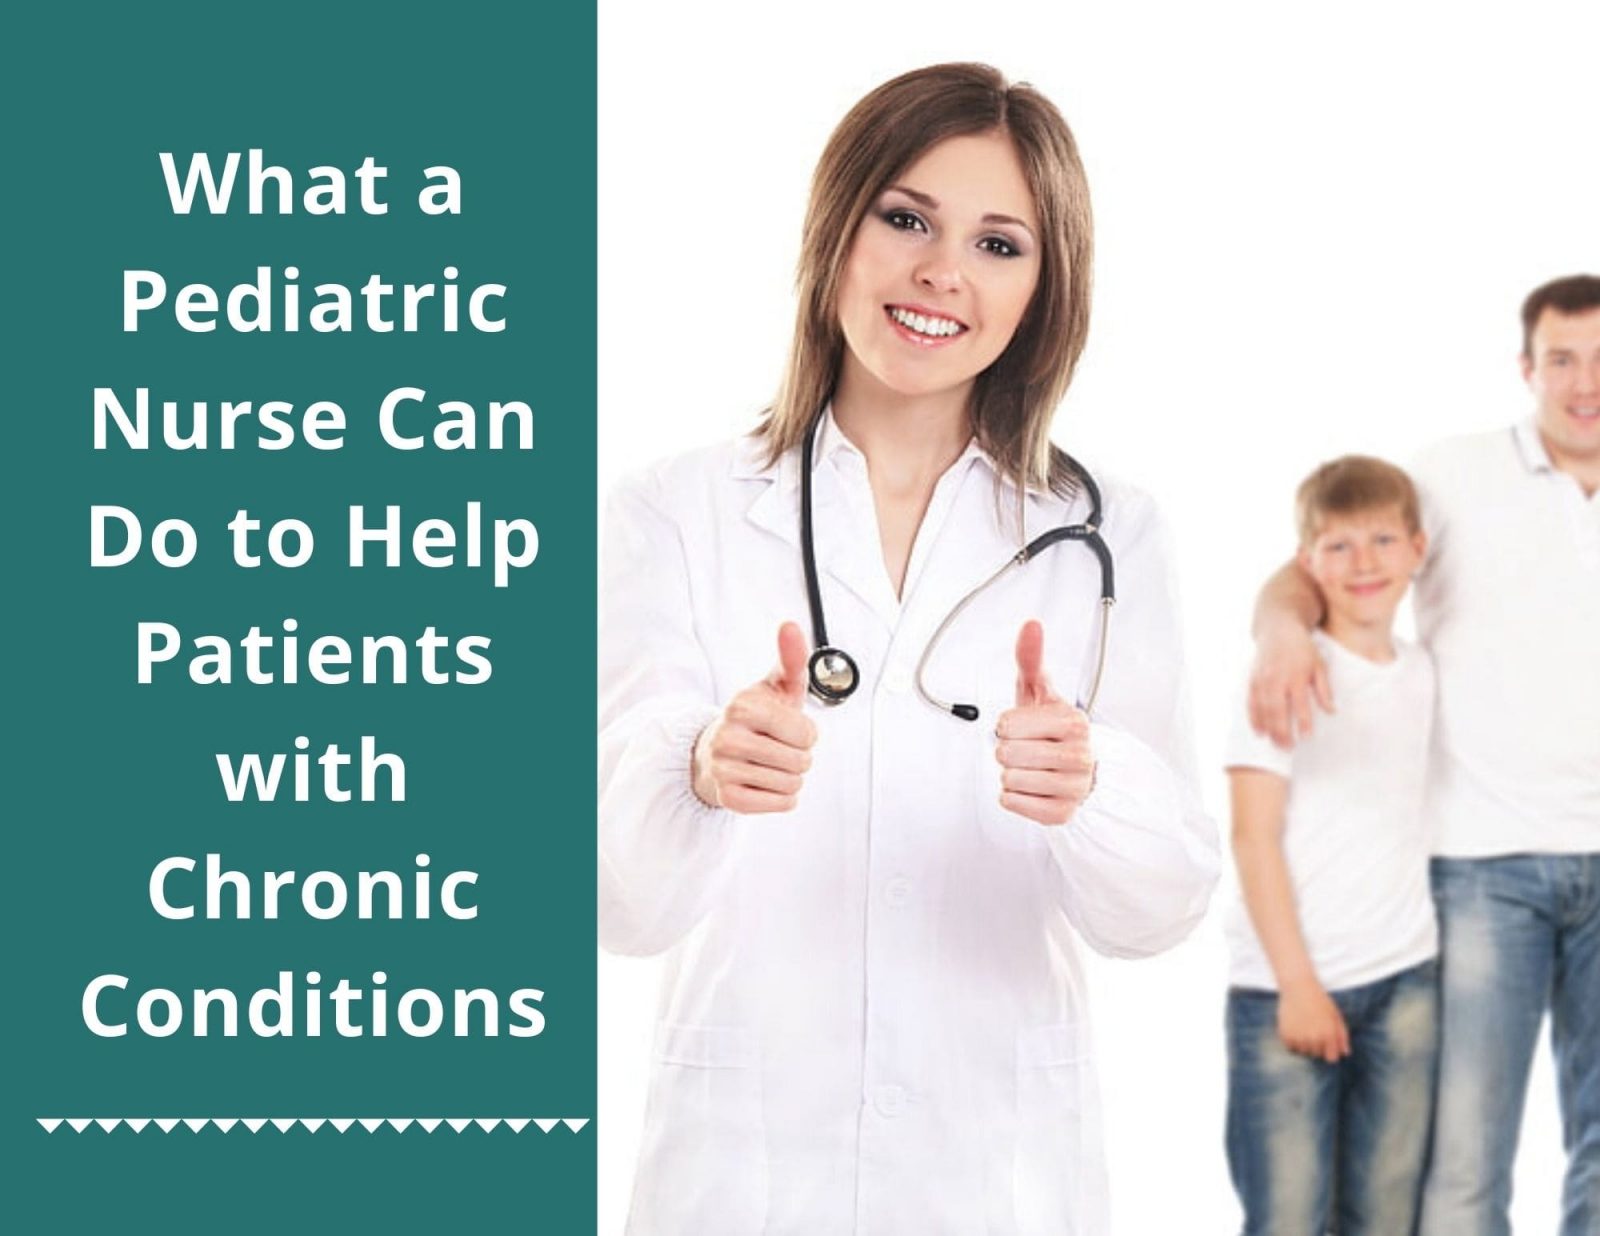 What a Pediatric Nurse Can Do to Help Patients with Chronic Conditions